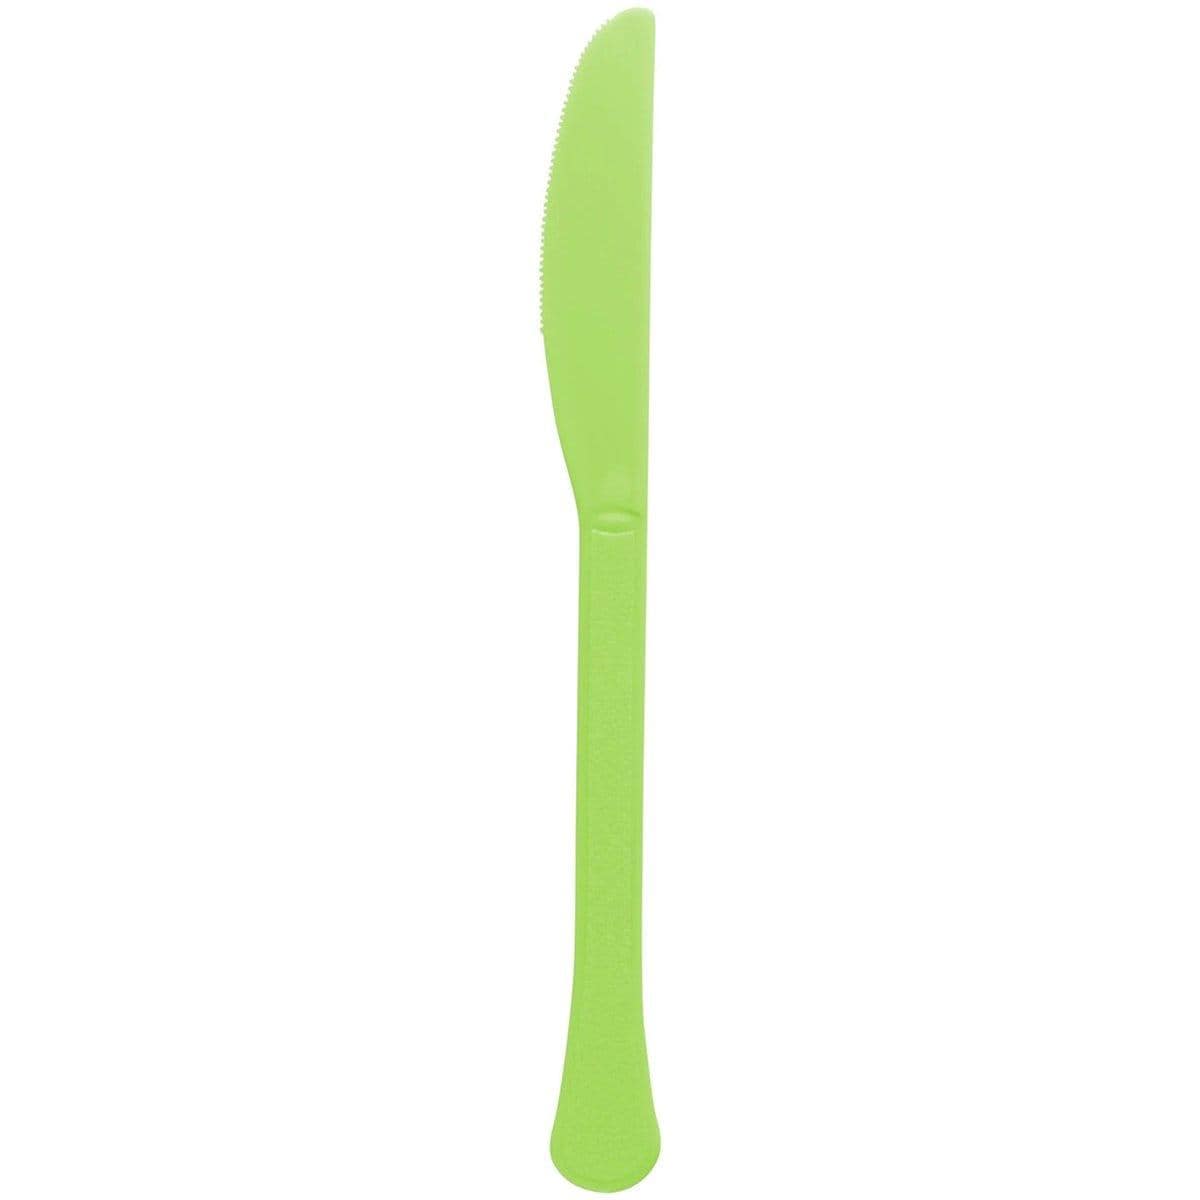 Buy Plasticware Kiwi Plastic Knives, 20 Count sold at Party Expert